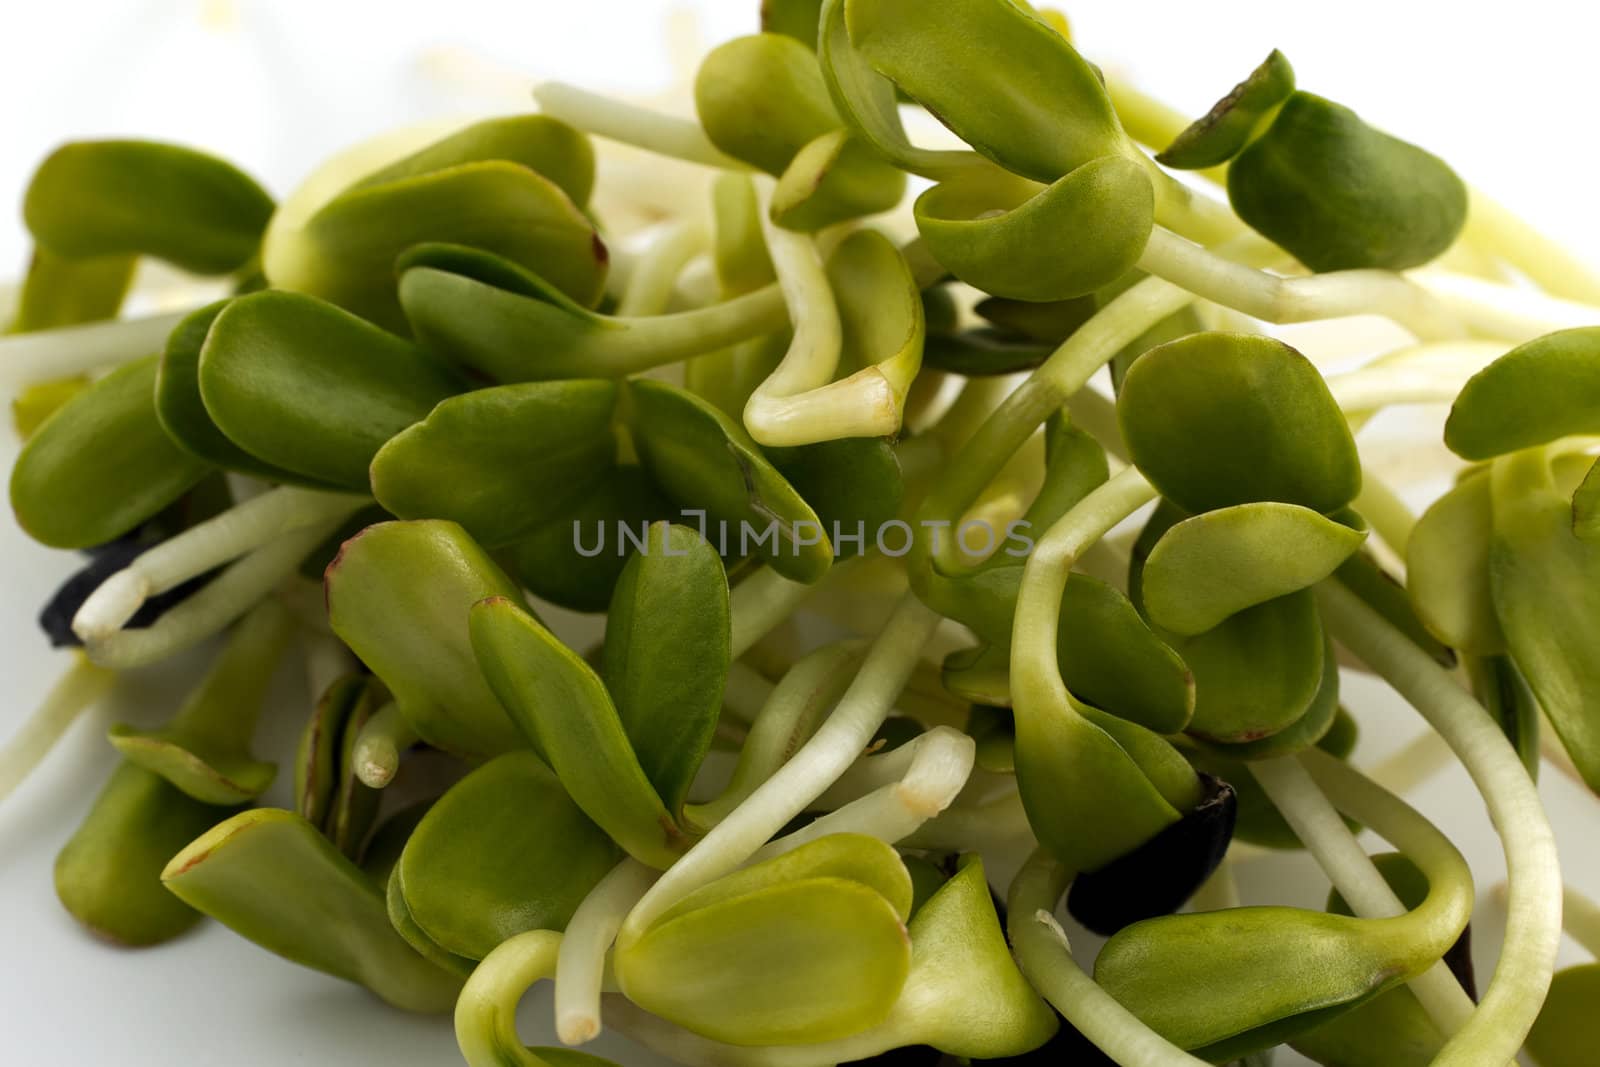 handful of green sprouts  isolated on white background - macro